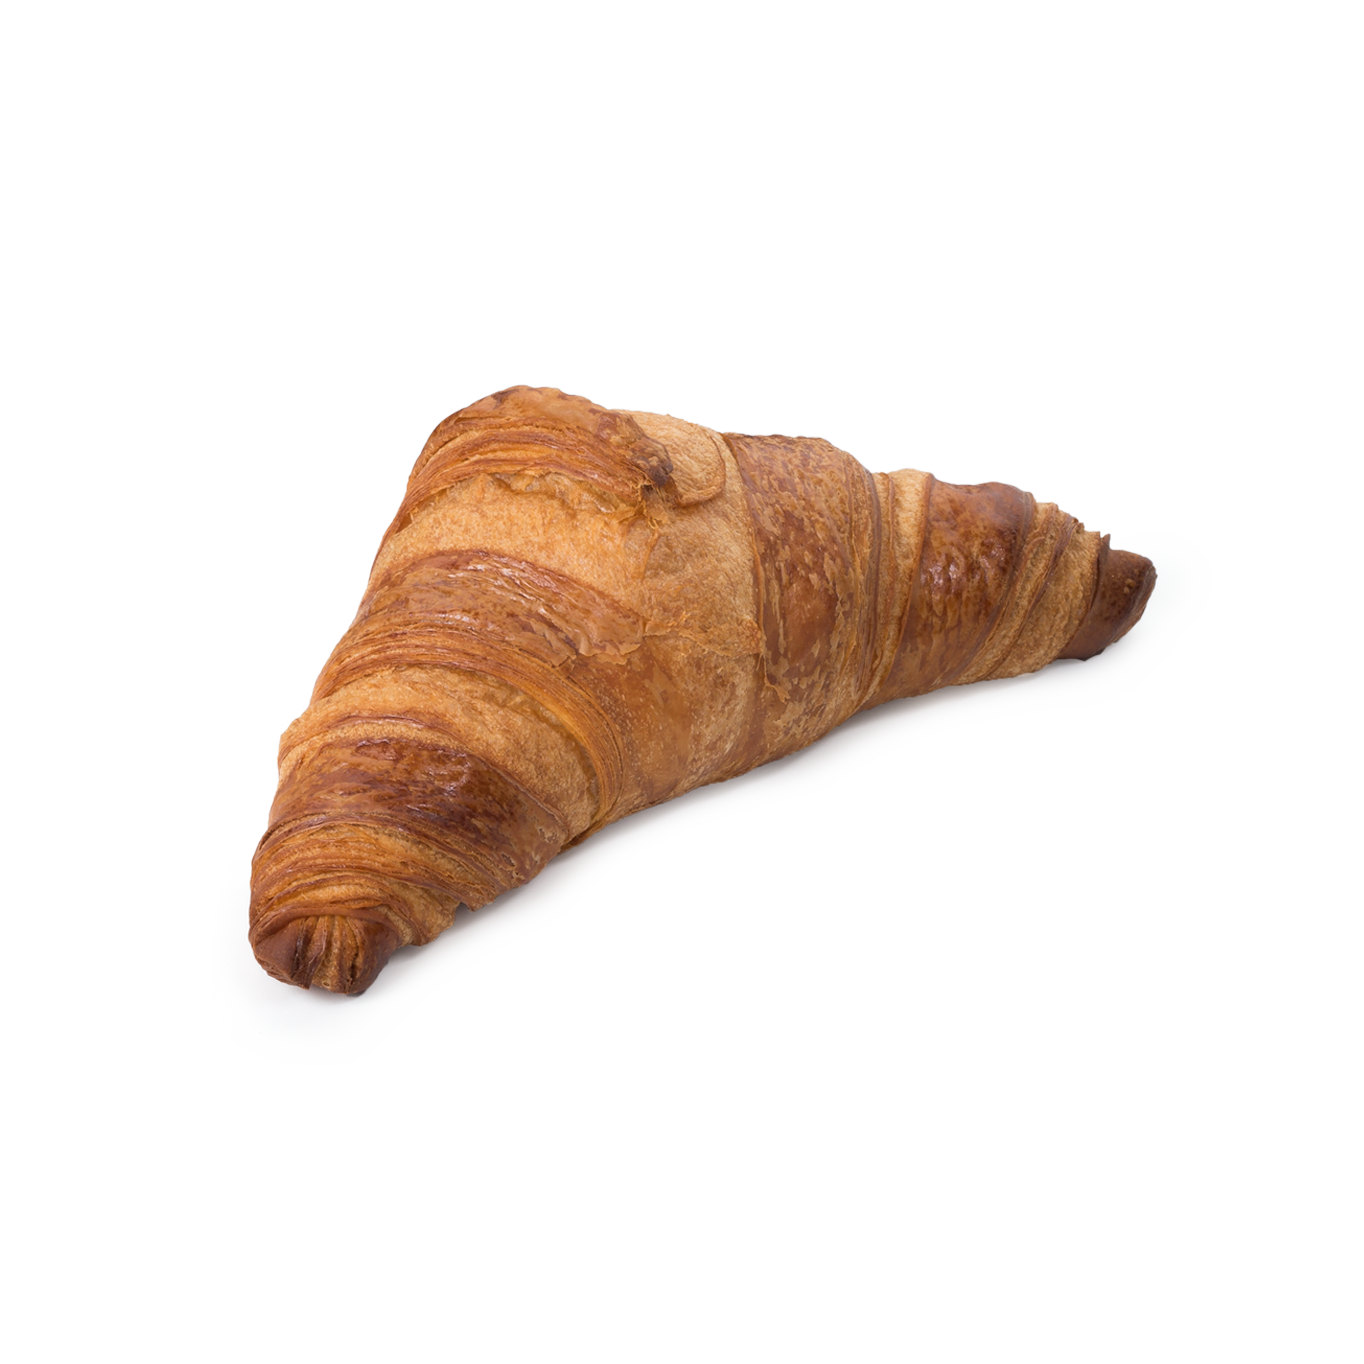 Ferm. Straight Butter Croissant 70g - Pre-baked bread and frozen pastries